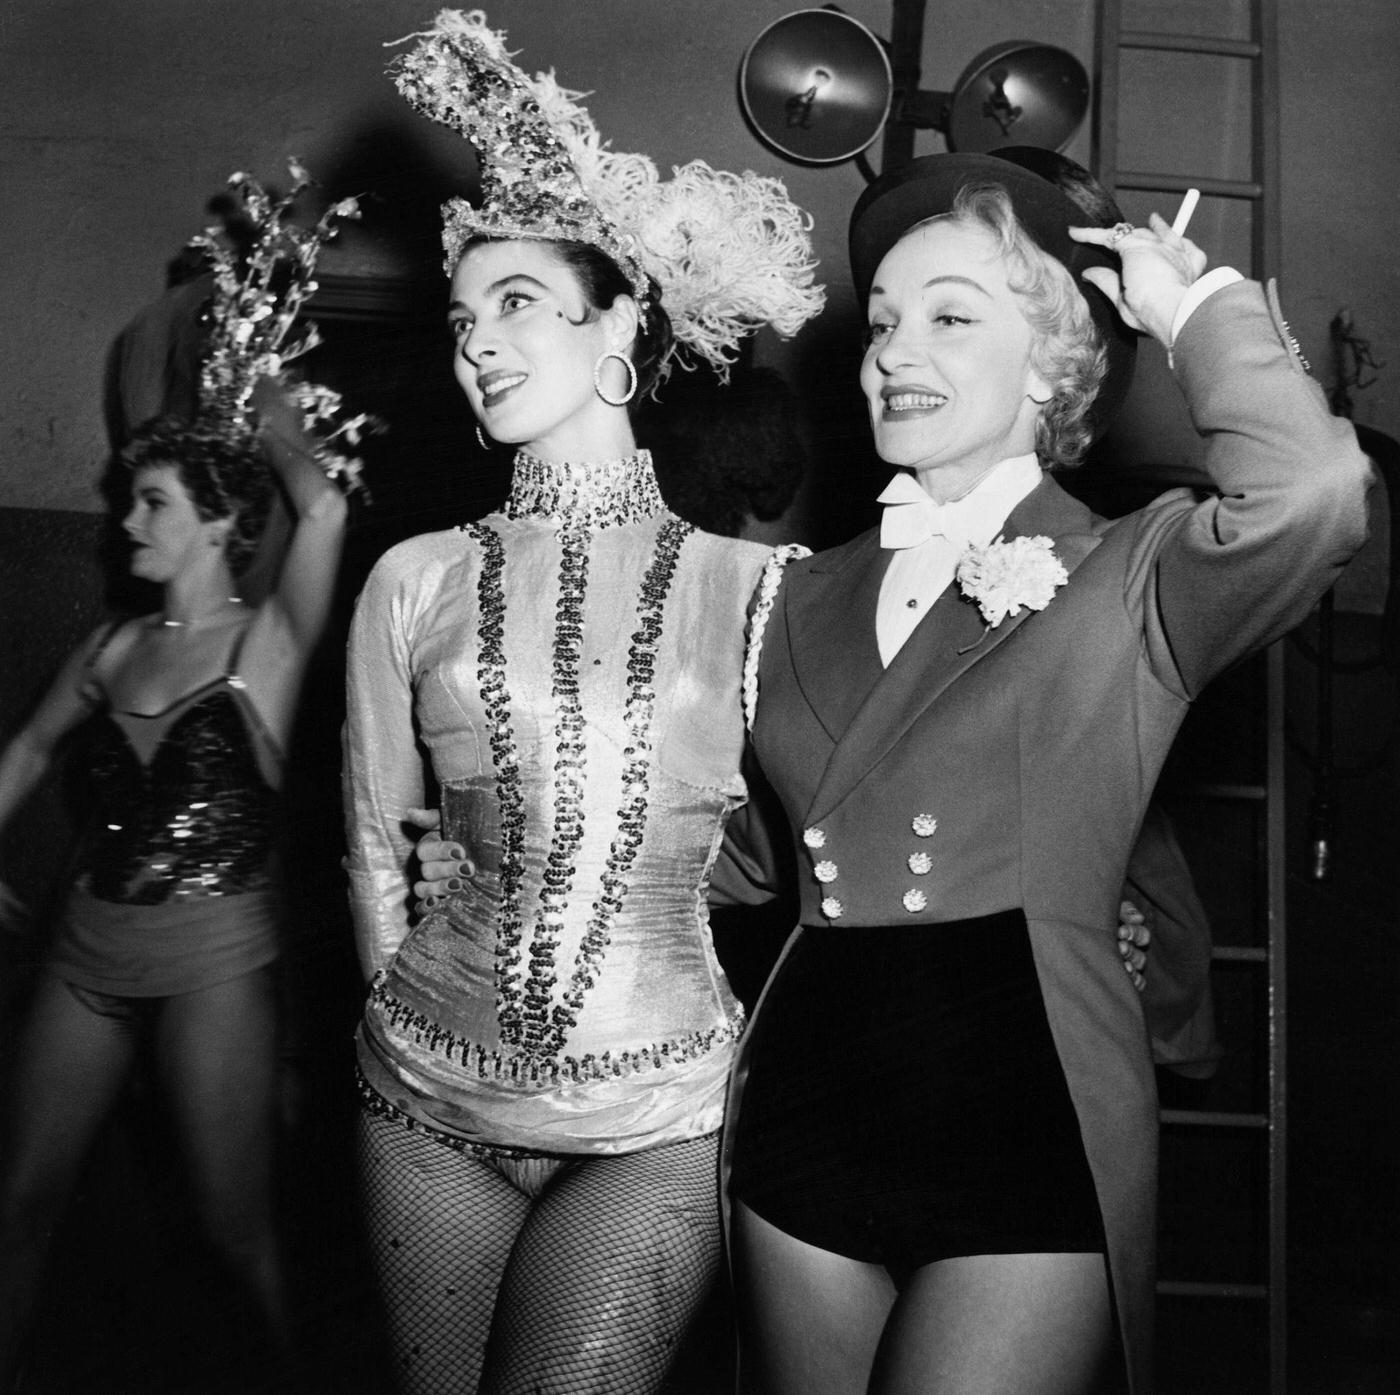 Rita Gam and Marlene Dietrich perform at the opening of a circus in New York City in 1952.